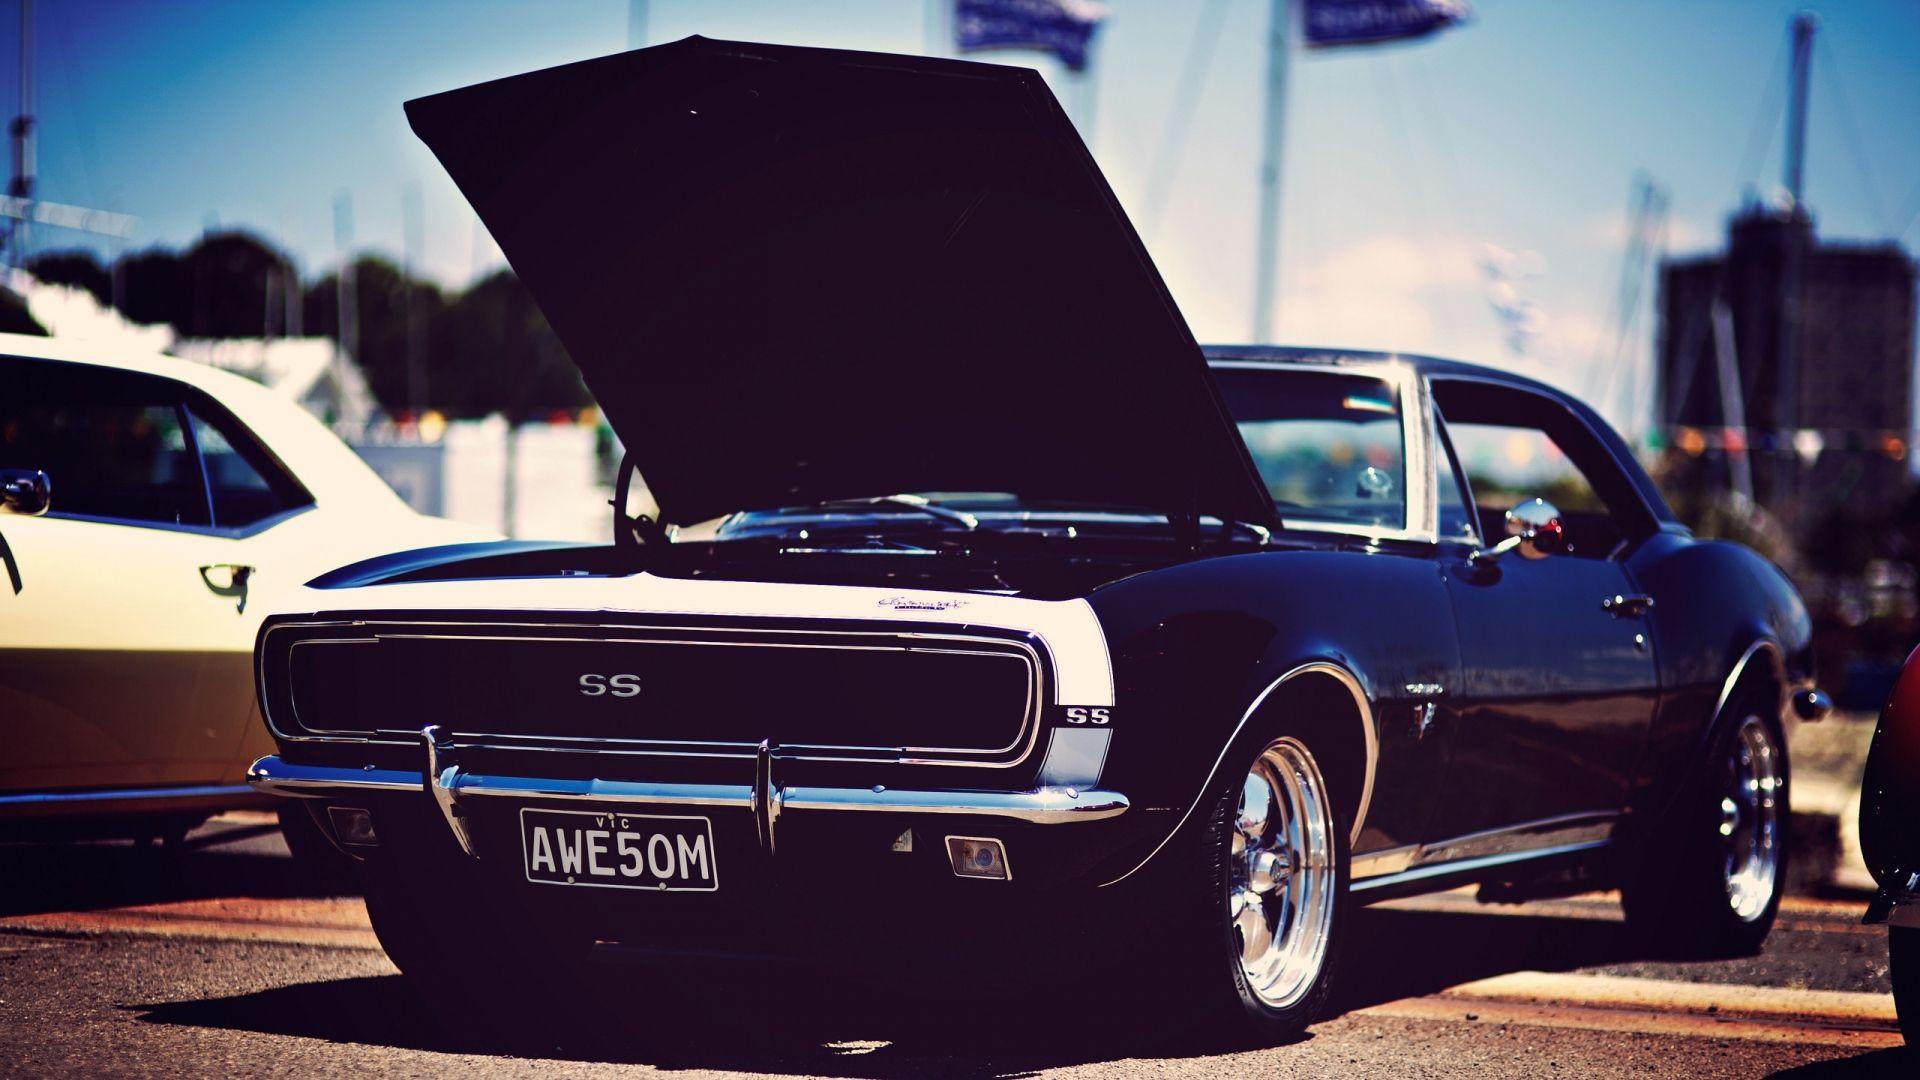 RO37: Muscle Car Wallpaper, Awesome Muscle Car Background